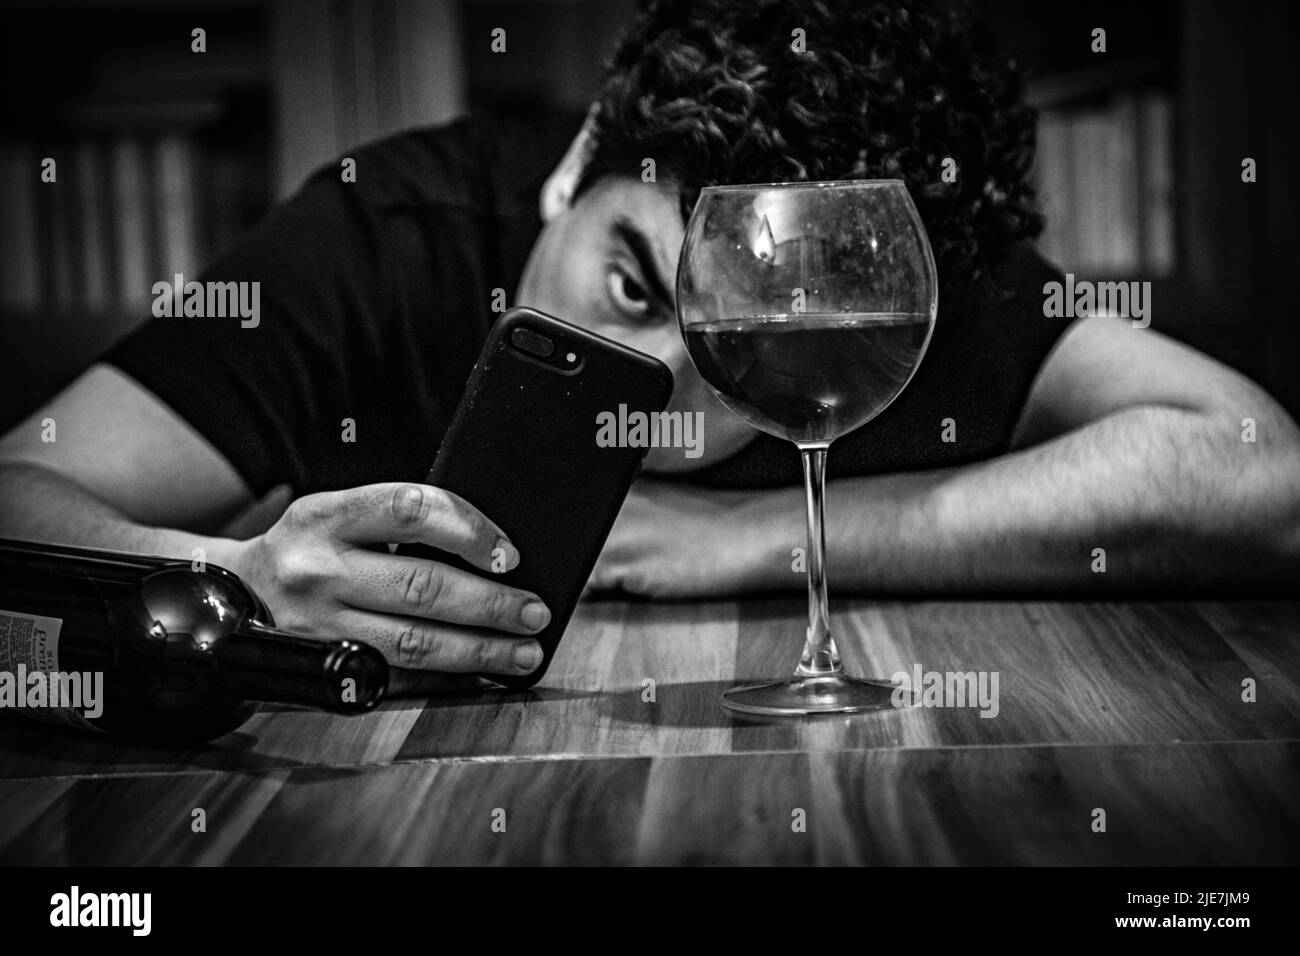 Drinking alone, young man sitting at bar counter with wine, alcoholic, sad, depressed, drunk, alcohol addiction, abuse, alcoholism concept Stock Photo